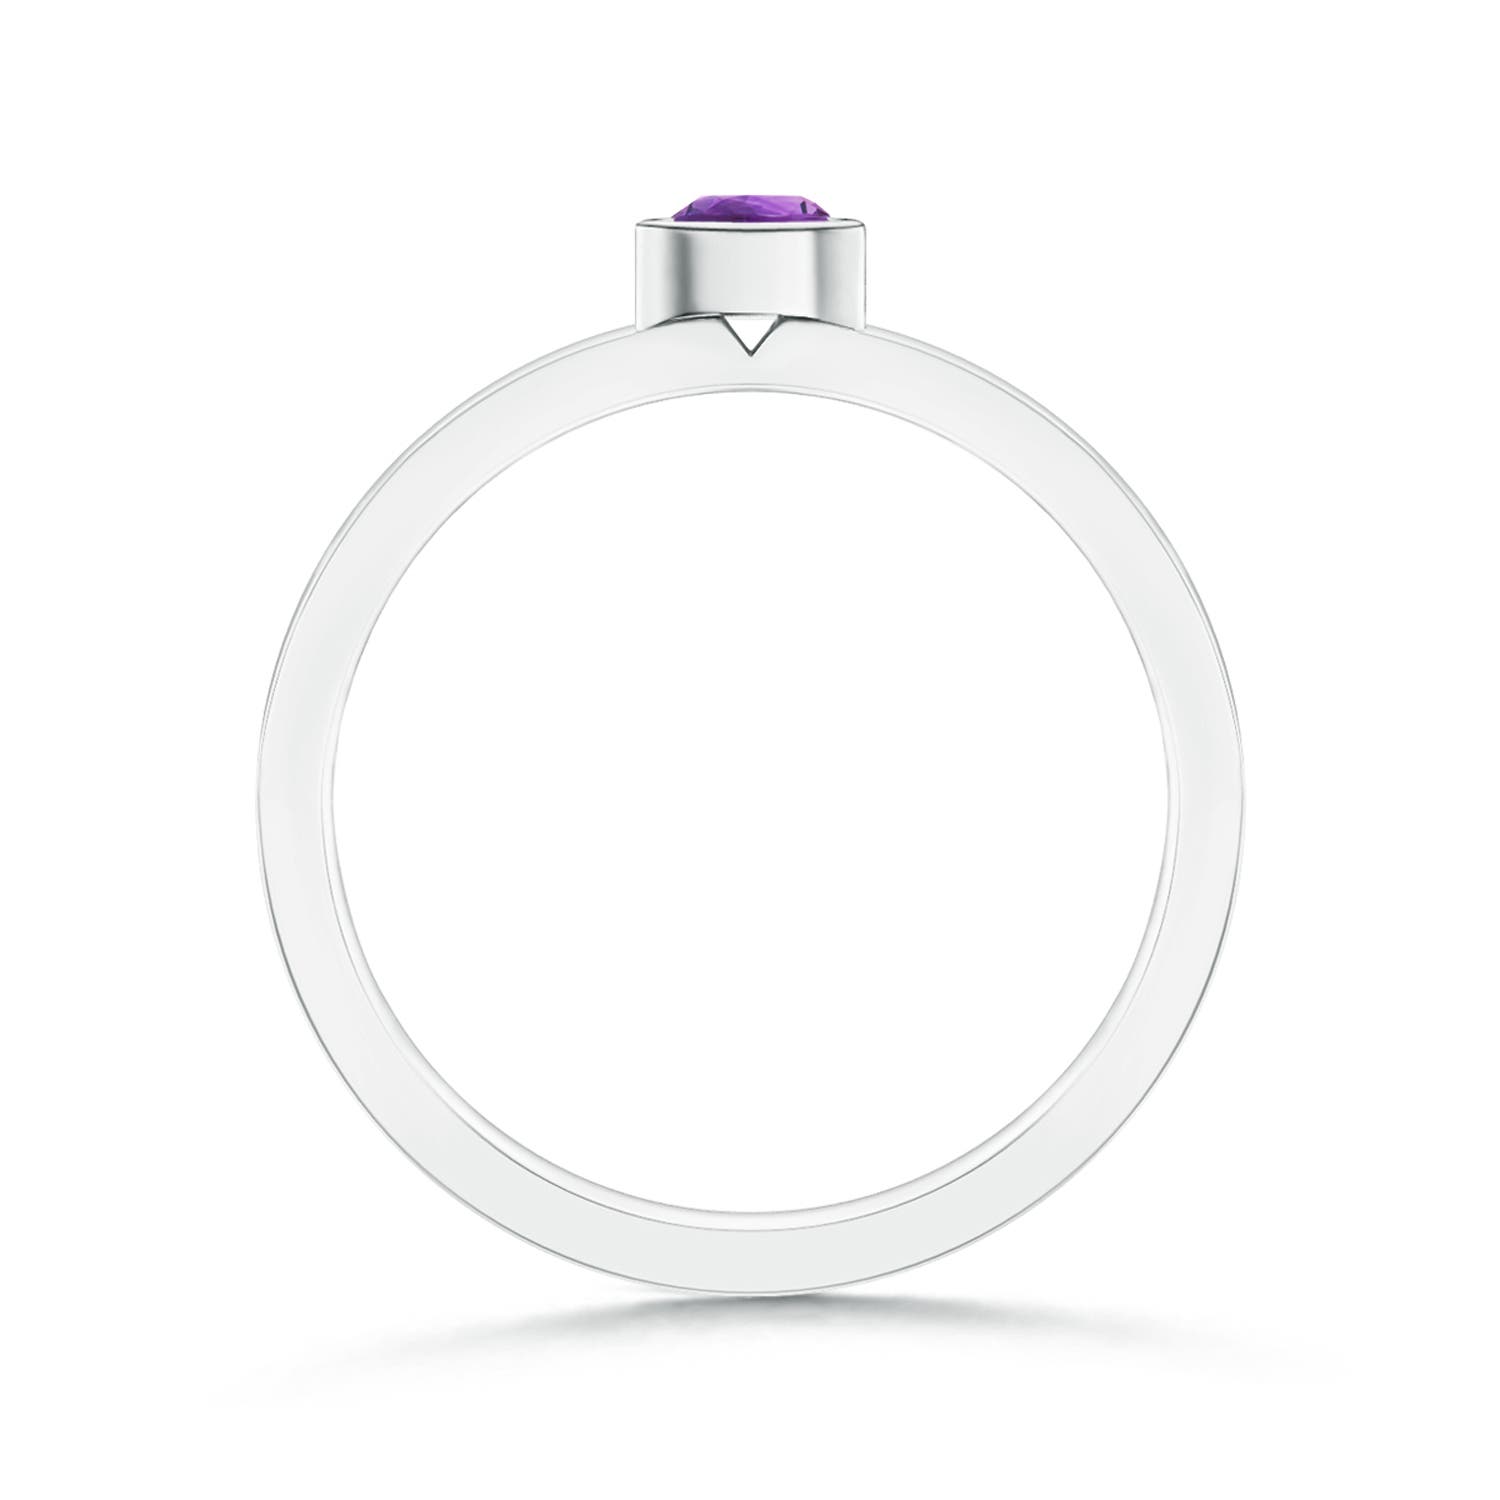 AAA - Amethyst / 0.16 CT / 14 KT White Gold